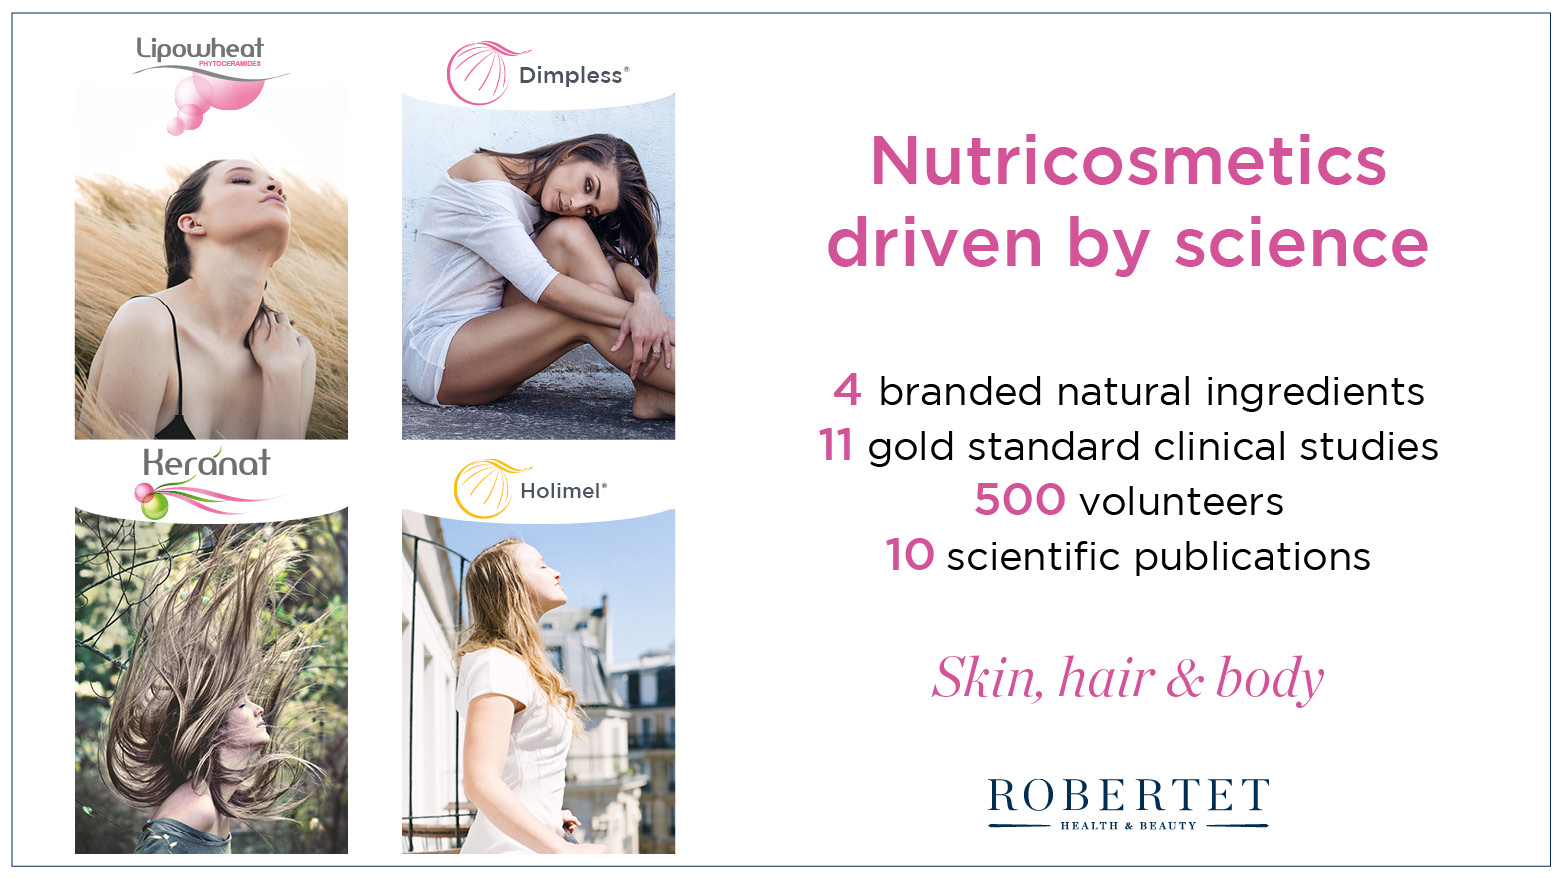 Robertet Nutricosmetic’s offer driven by science